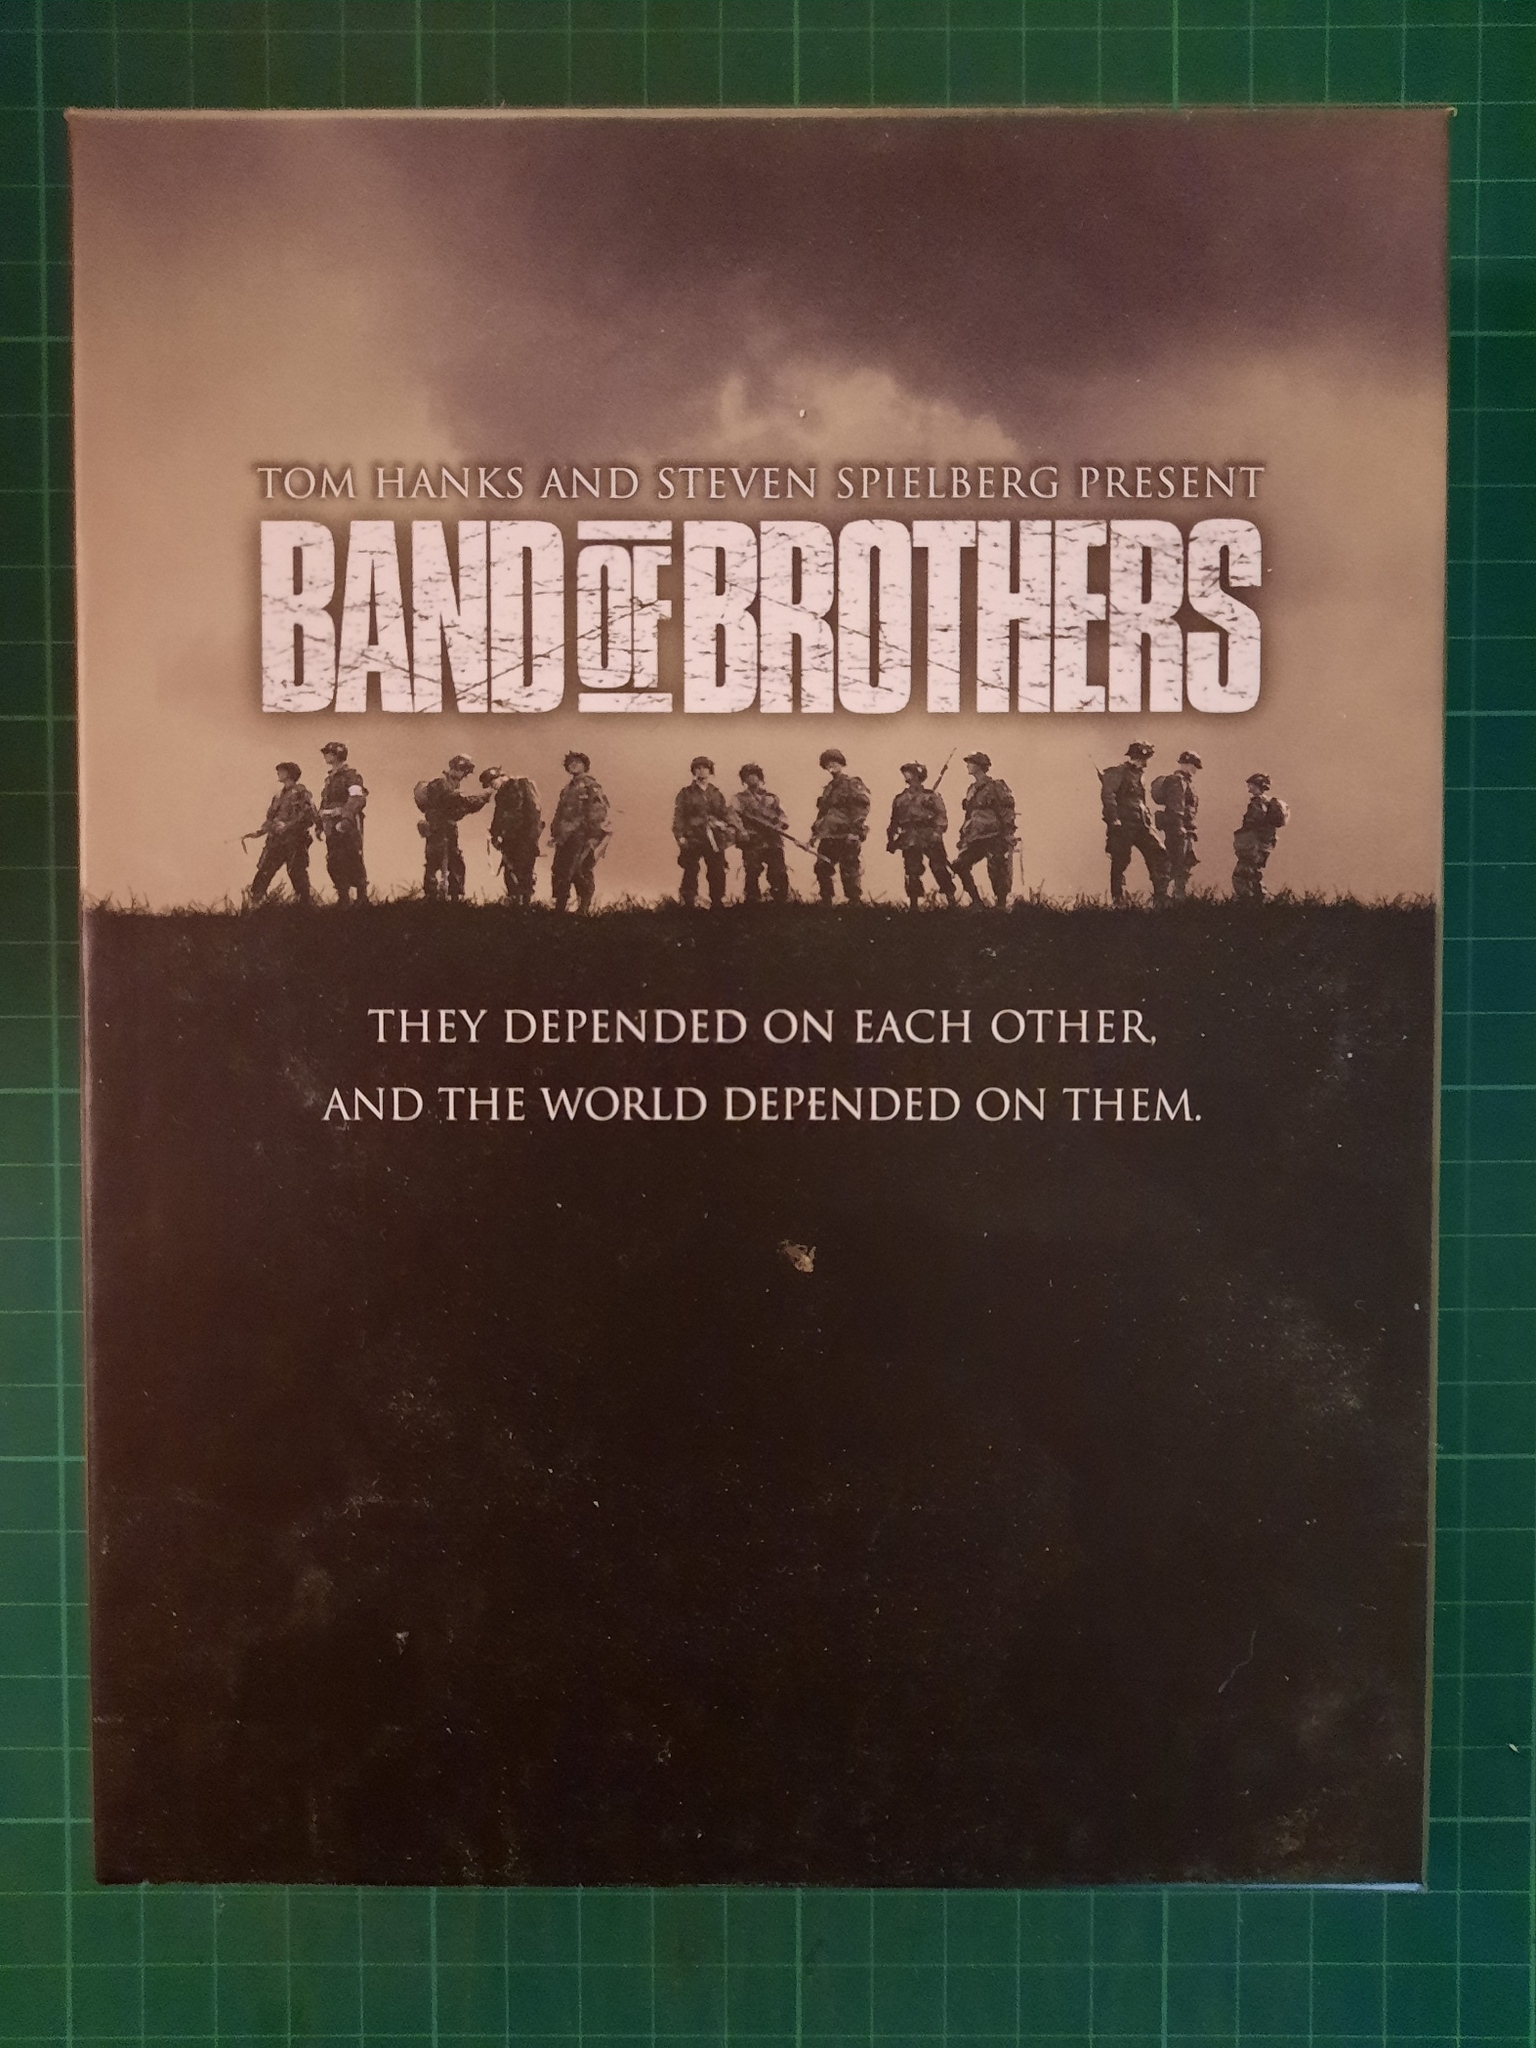 DVD : Band of brothers